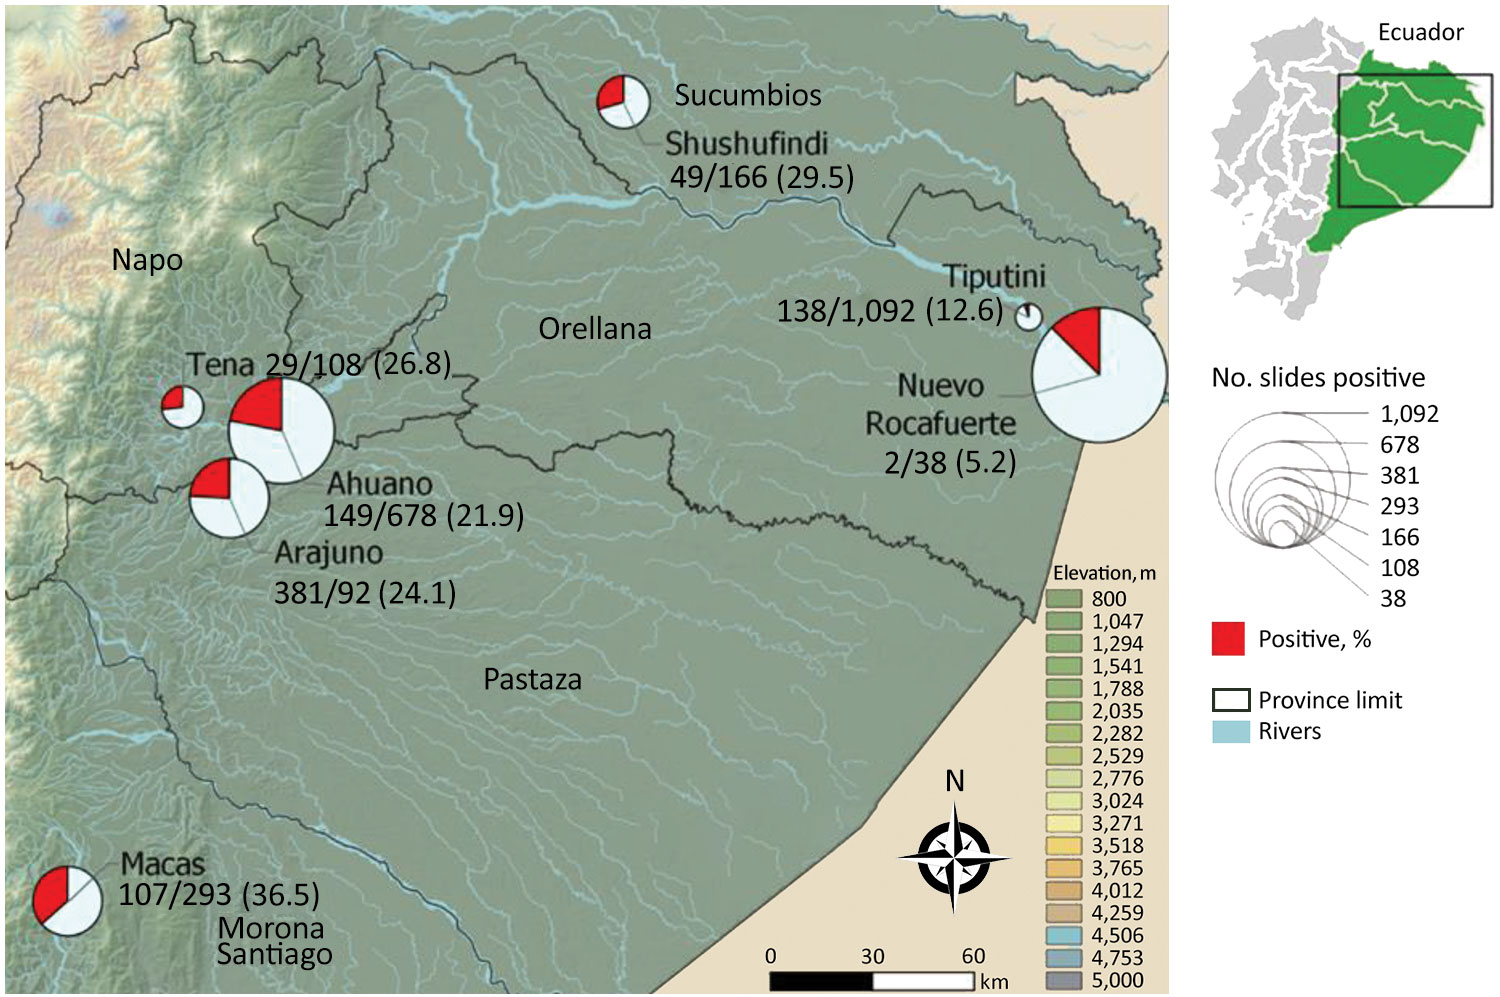 Amazon region of Ecuador where testing for Mansonella ozzardi microfilariae in humans was conducted. Of 2,756 archived slides from human infections, 566 (20.5%) were positive for this parasite. Values are no. positive/no. tested (%). Inset shows location of study area within Ecuador.